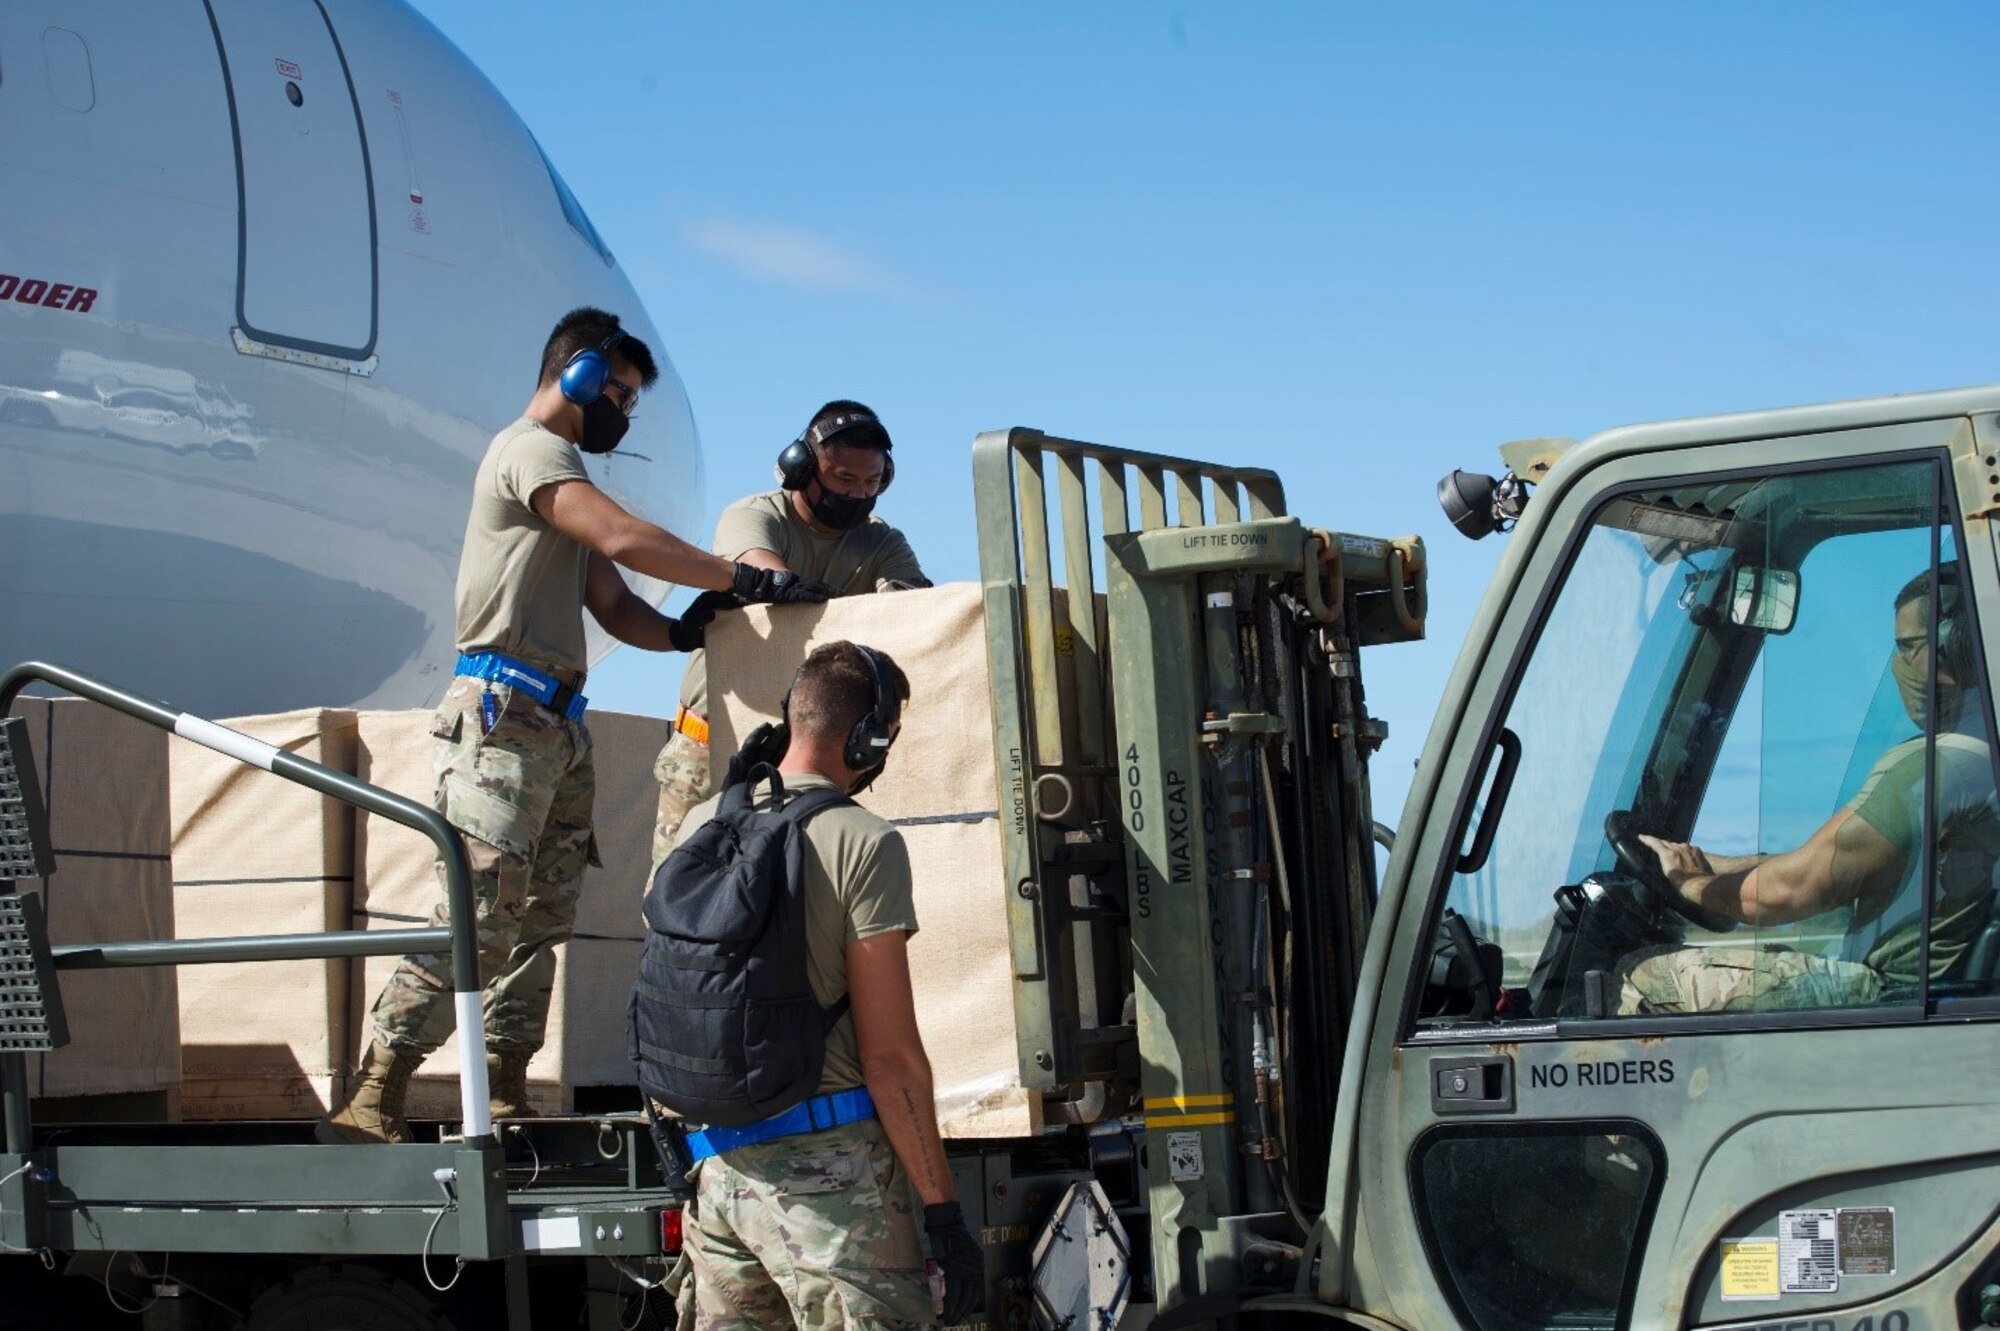 A team of Reserve Citizen Airmen from the 44th Aerial Port Squadron guide COVID-19 reefers onto a forklift operated by the 734th Air Mobility Squadron member at Andersen Air Force Base, Guam, Feb. 23, 2021.